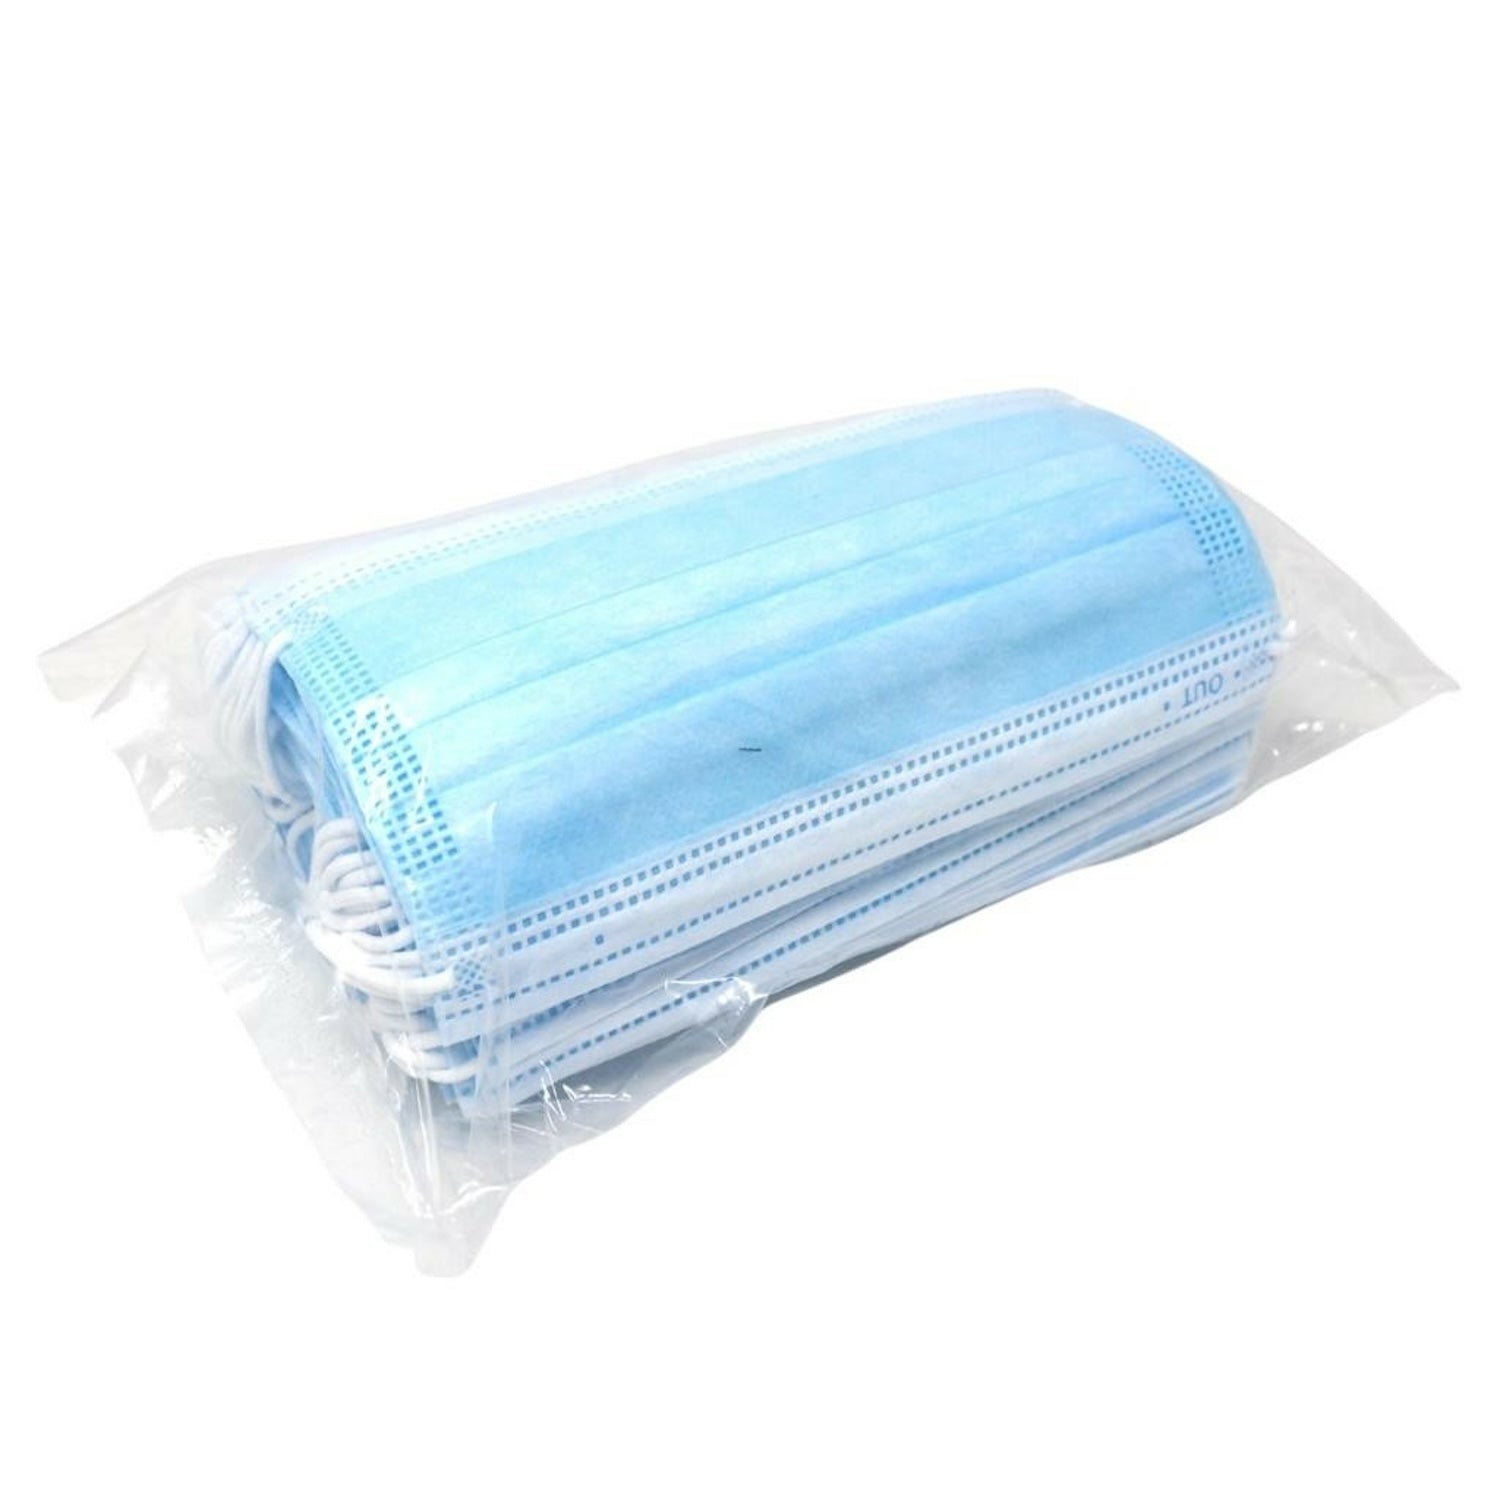 Surgical Type IIR Facemask | Blue | Pack of 50 | Short Expiry Date (1)